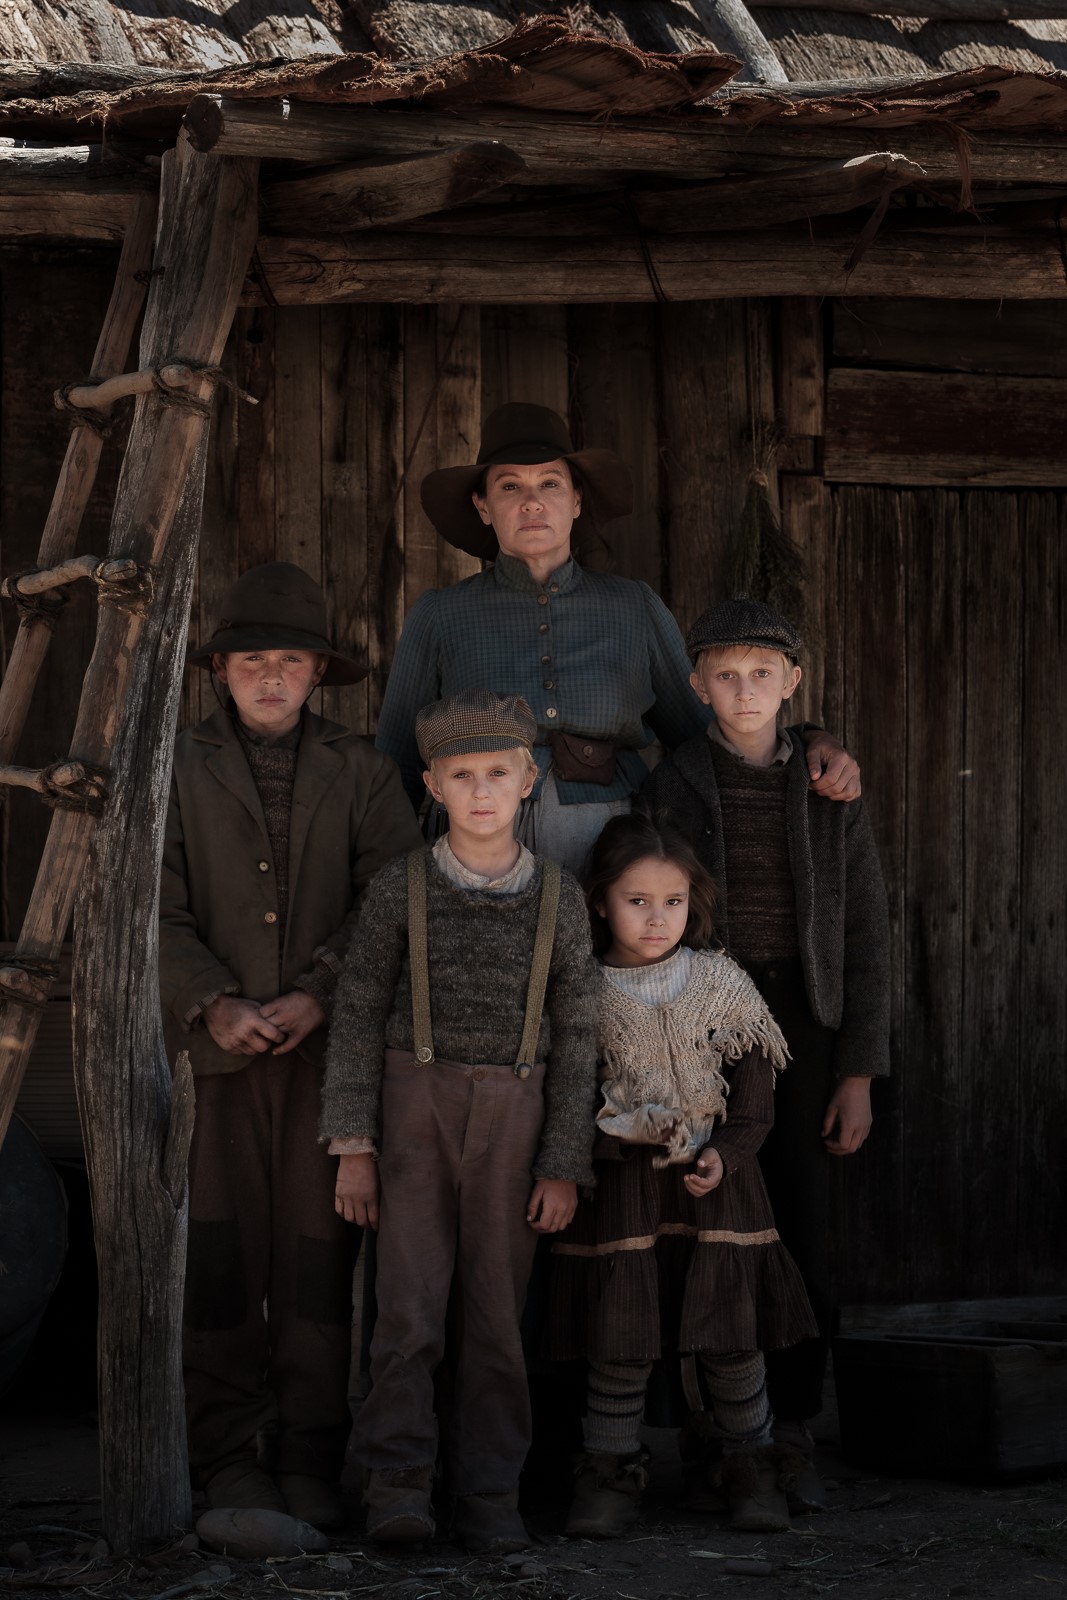 Jobe and Nash Zammit were cast in the film The Drover’s Wife: Legend of Molly. PICTURE: SUPPLIED